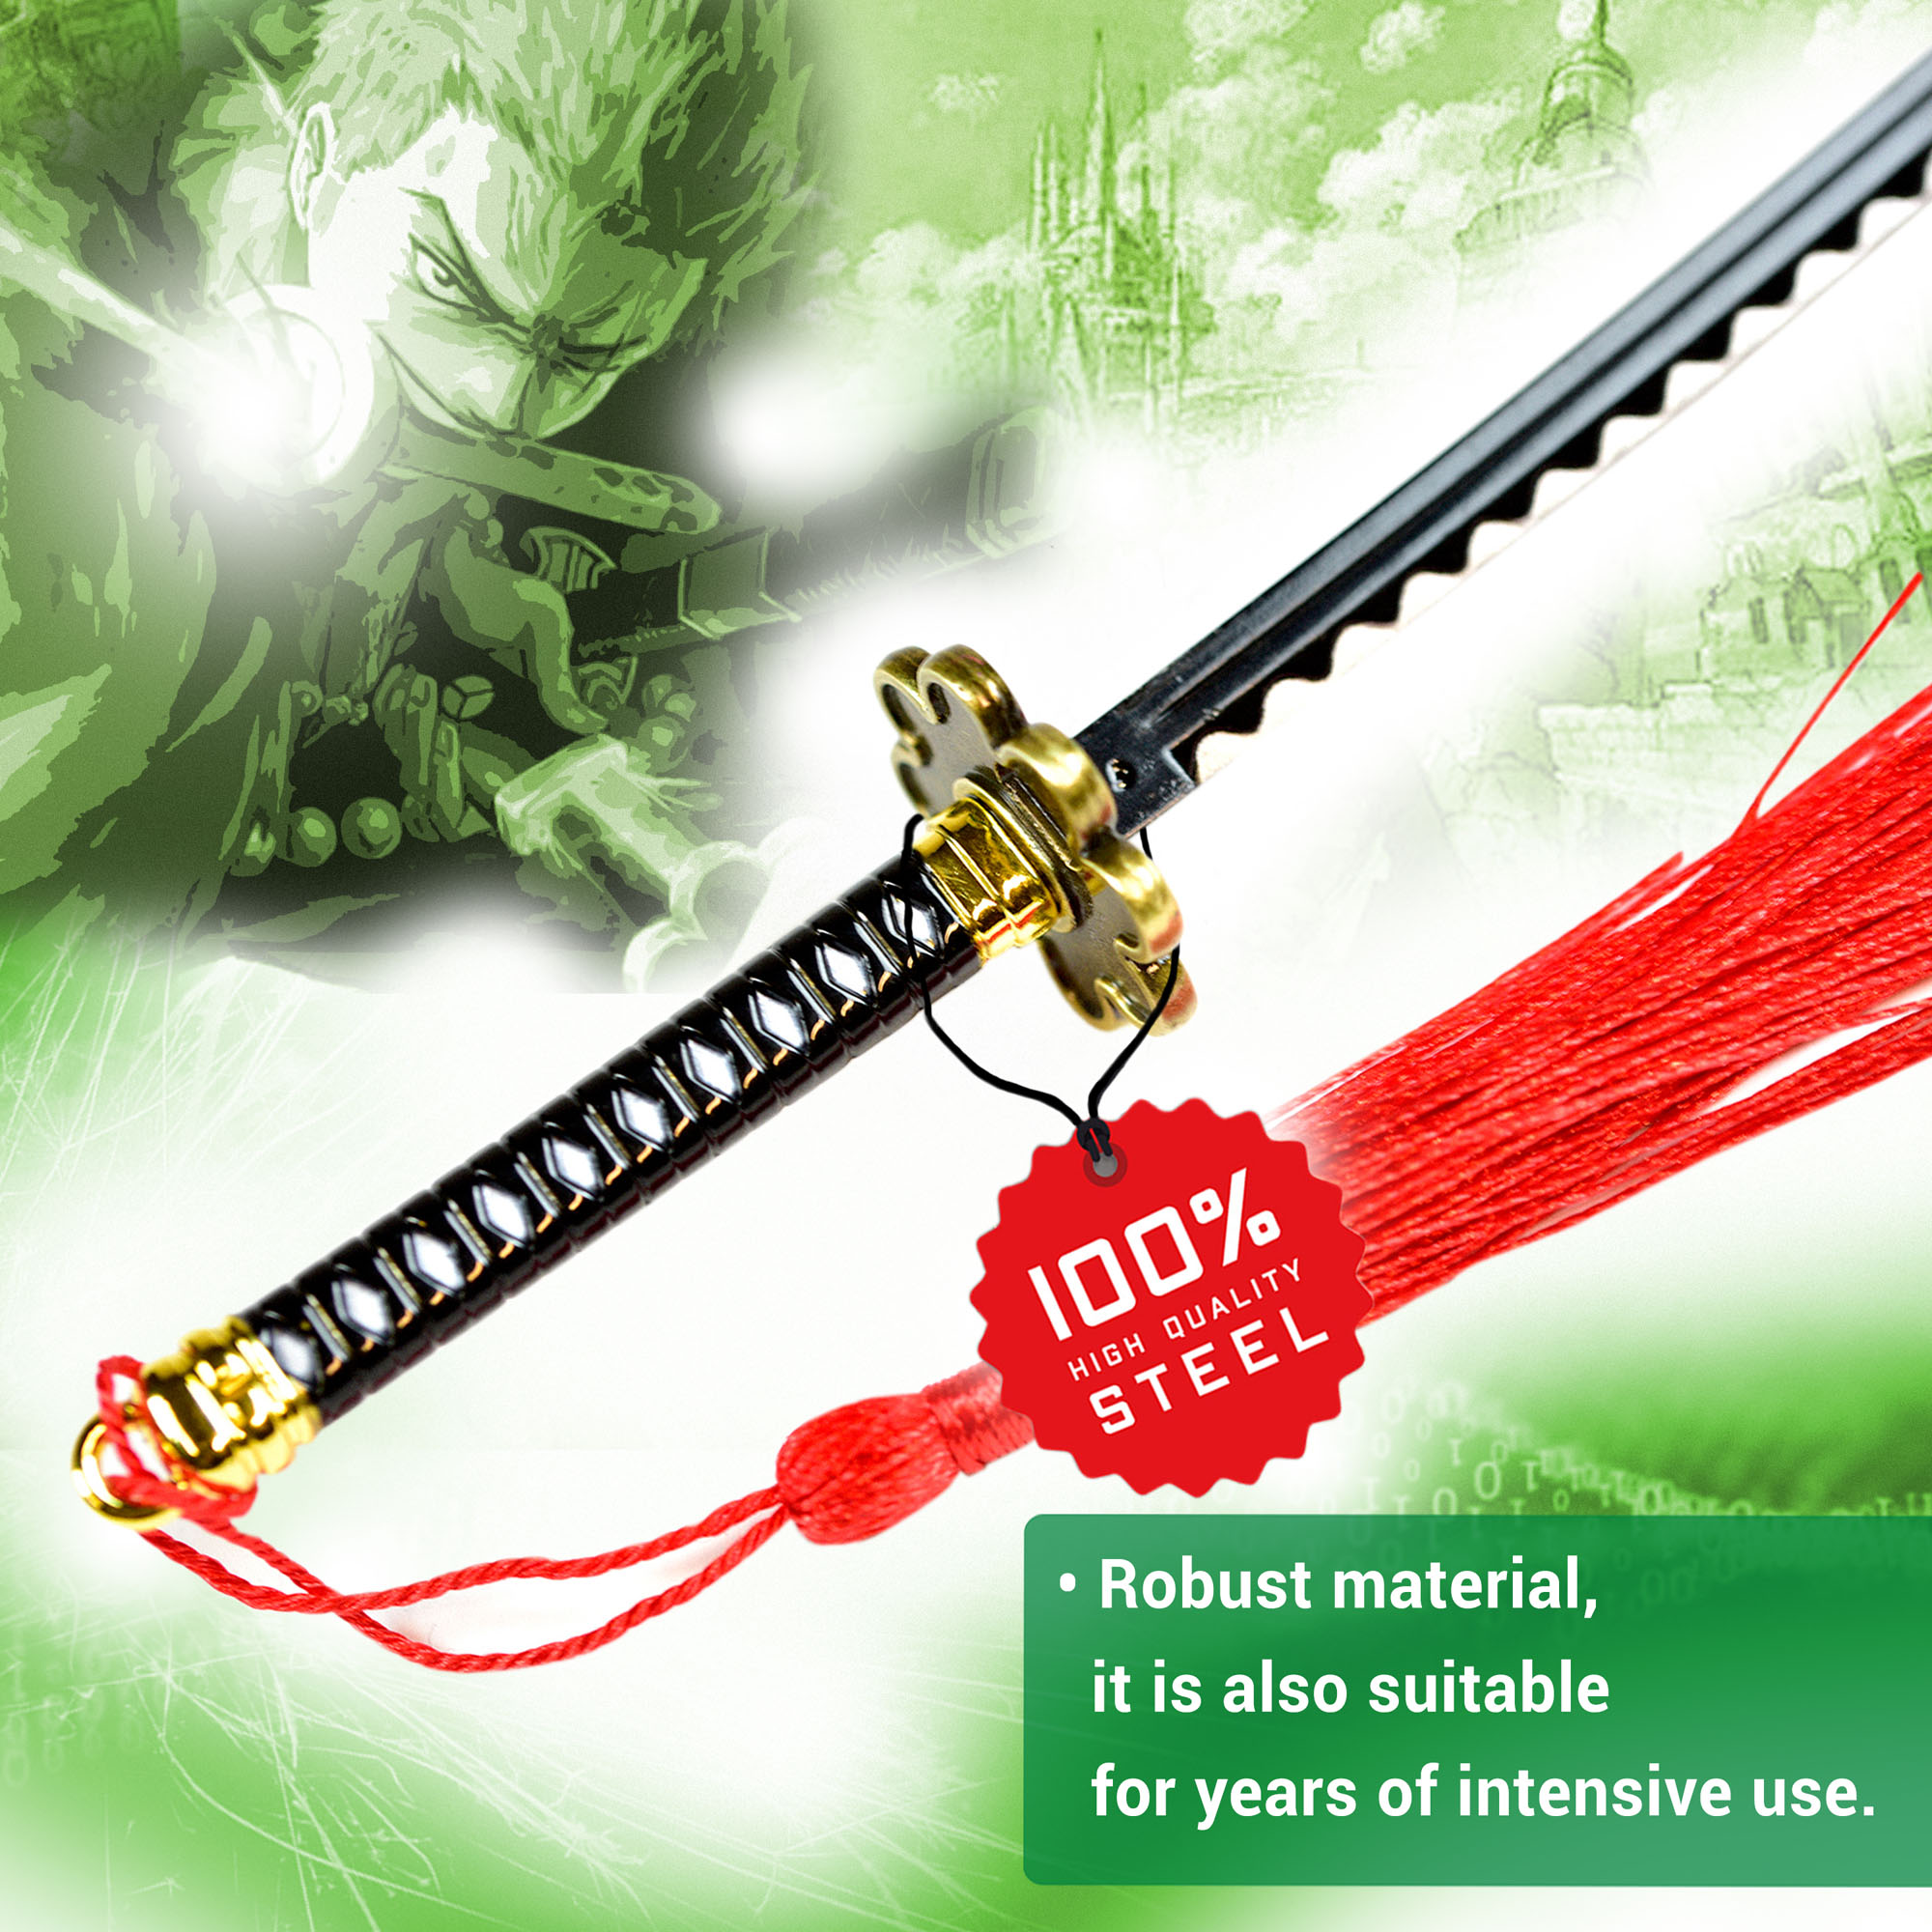 One Piece - Zoro´s Shuusui Sword - Letter Opener Version with Stand